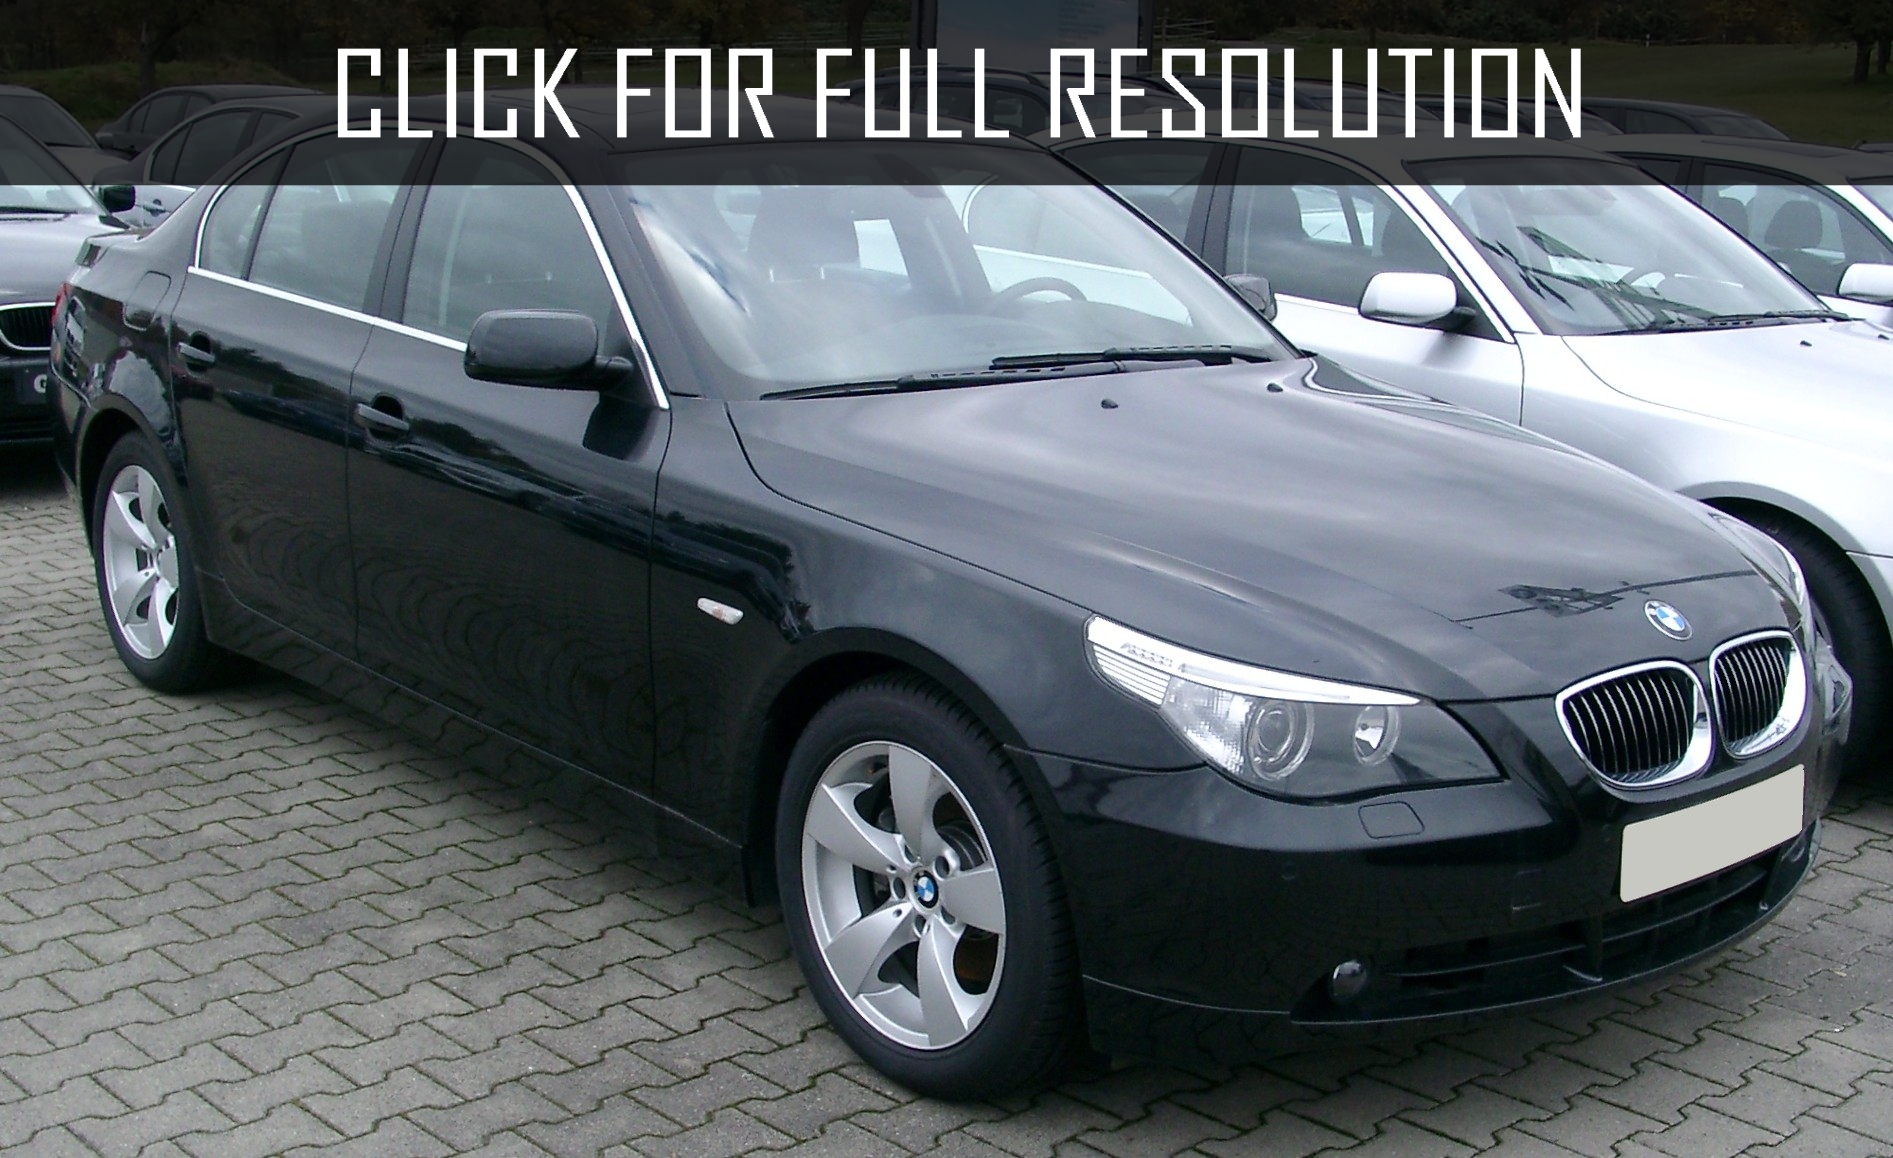 2007 Bmw E60 news, reviews, msrp, ratings with amazing